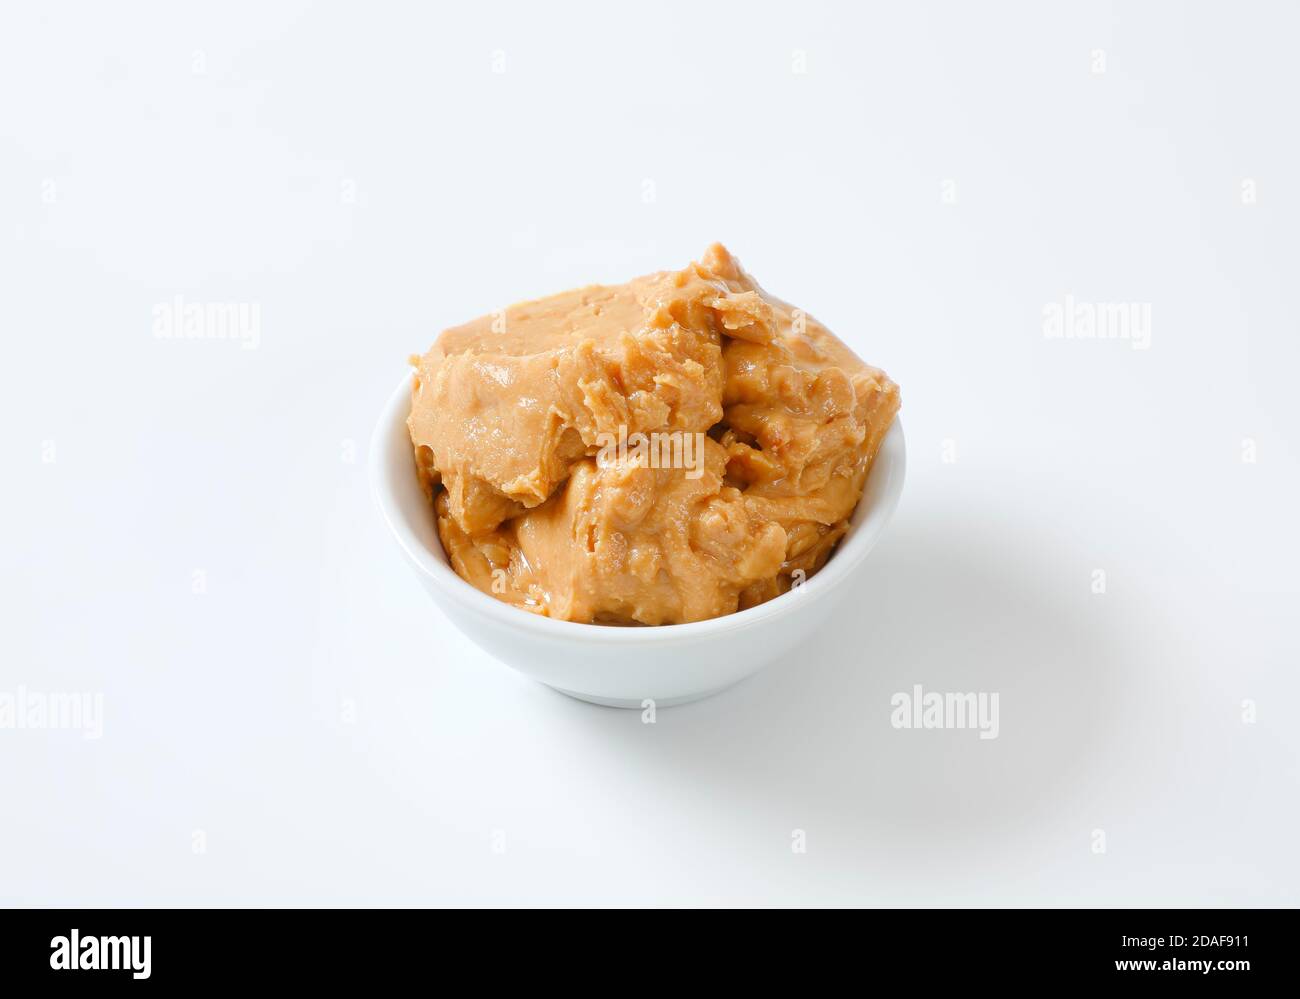 Crunchy peanut butter in white bowl Stock Photo